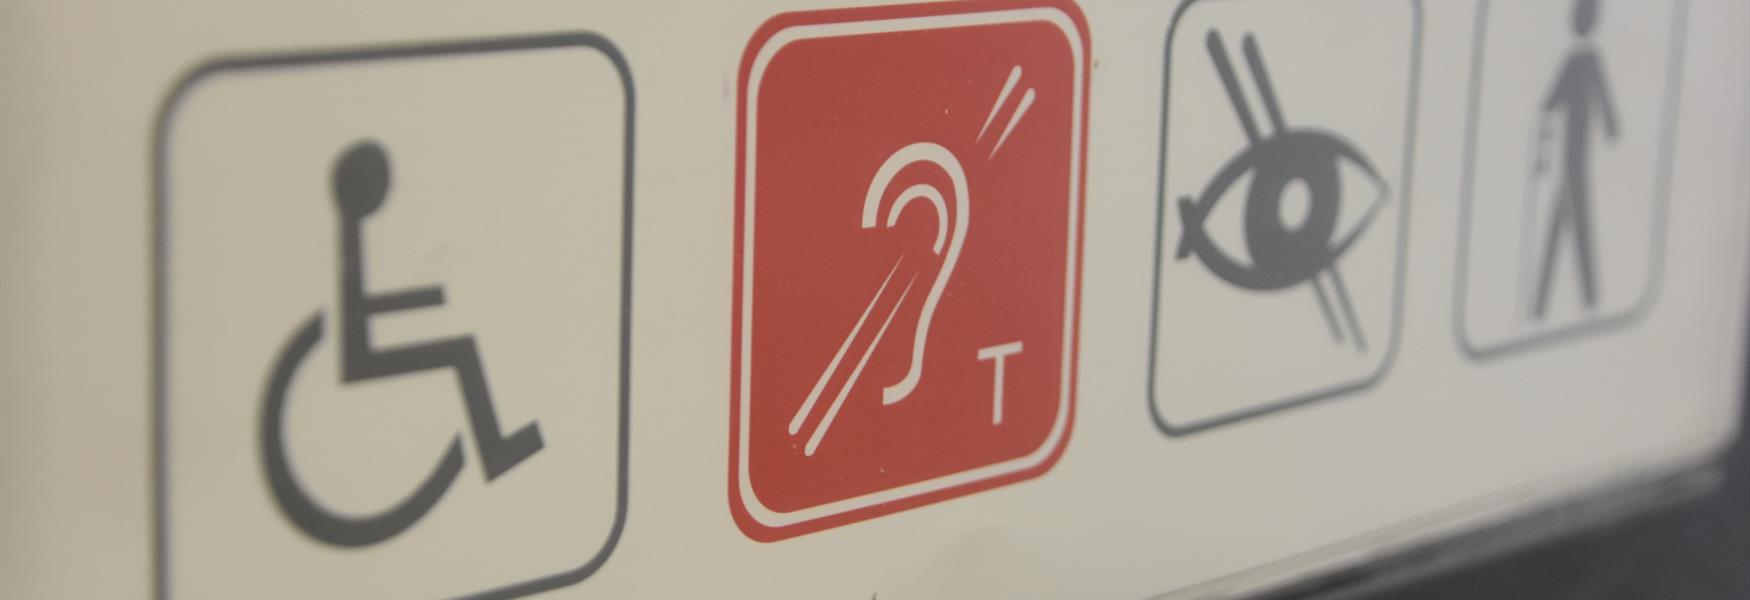 Accessibility sign showing wheelchair, hearing loop and braille